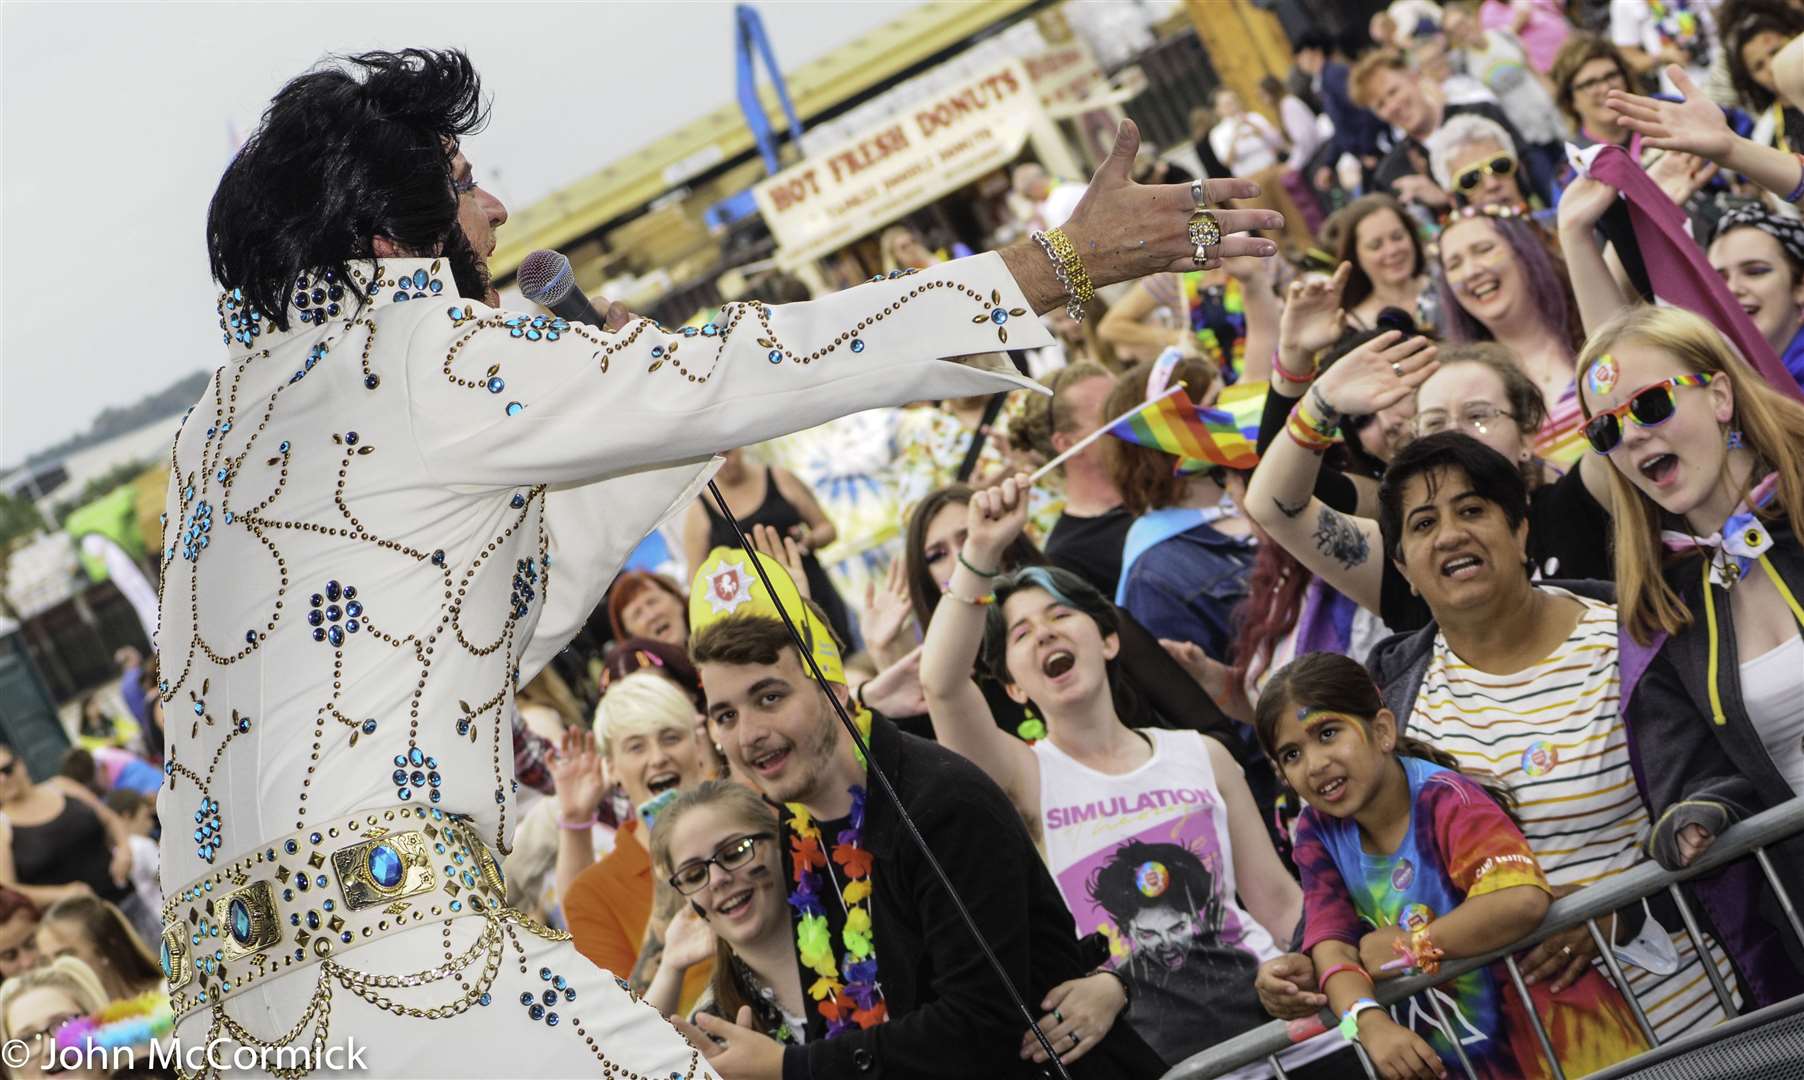 Elbrace, aka Gay Elvis entertains the crowd at Medway Pride. Photos by John McCormick